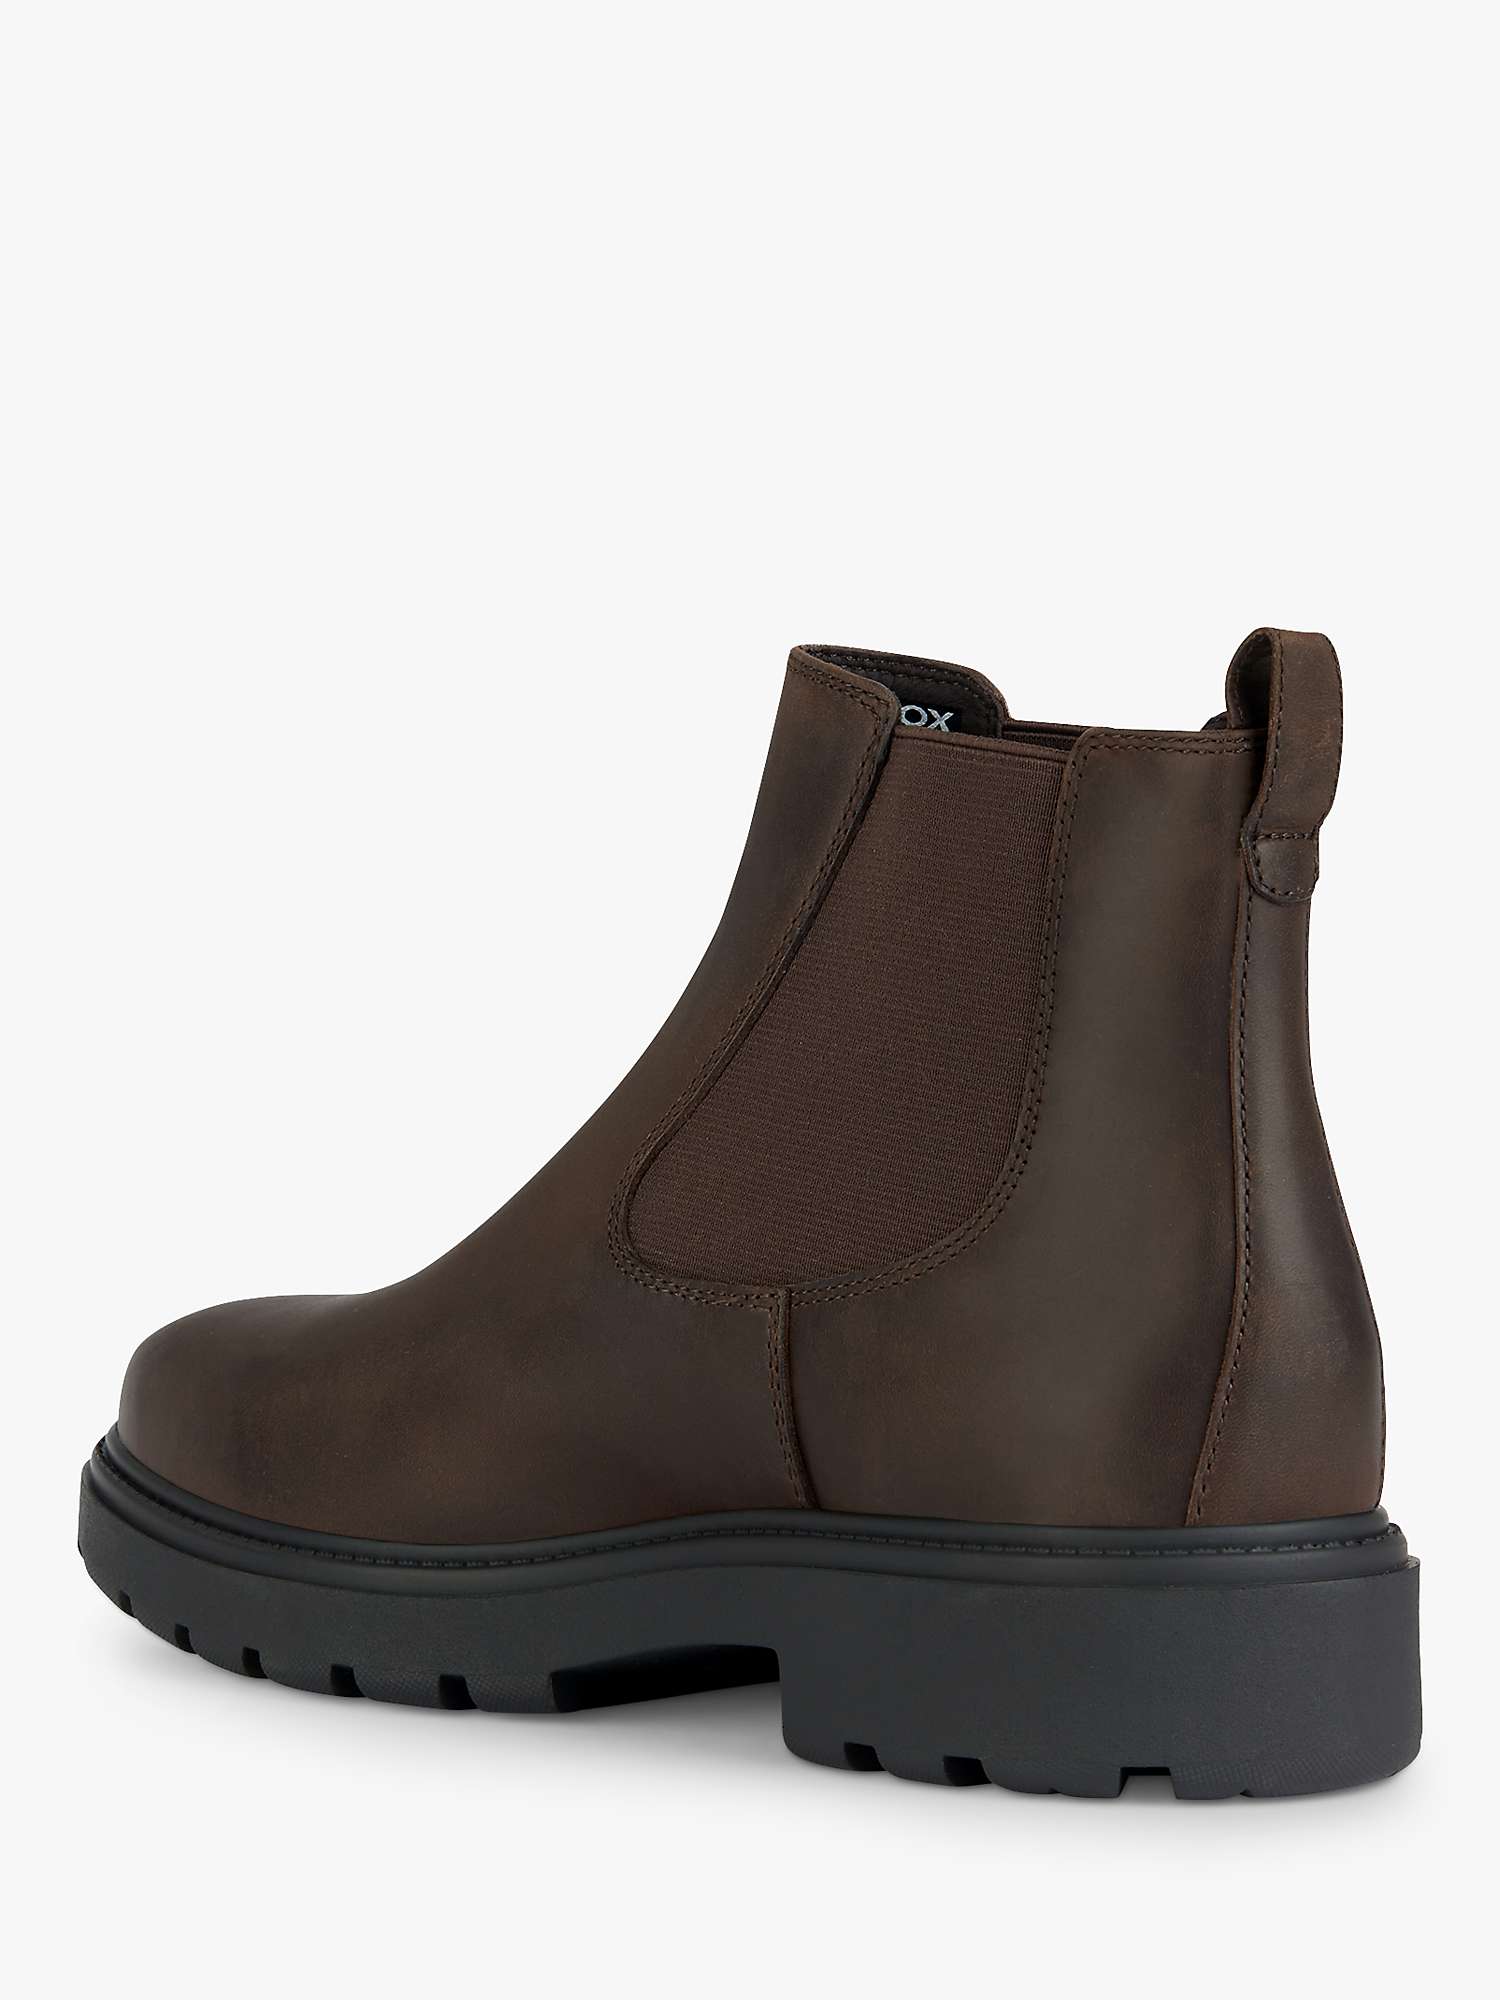 Buy Geox Wide Fit Spherica EC7 Leather Ankle Boots, Coffee Online at johnlewis.com